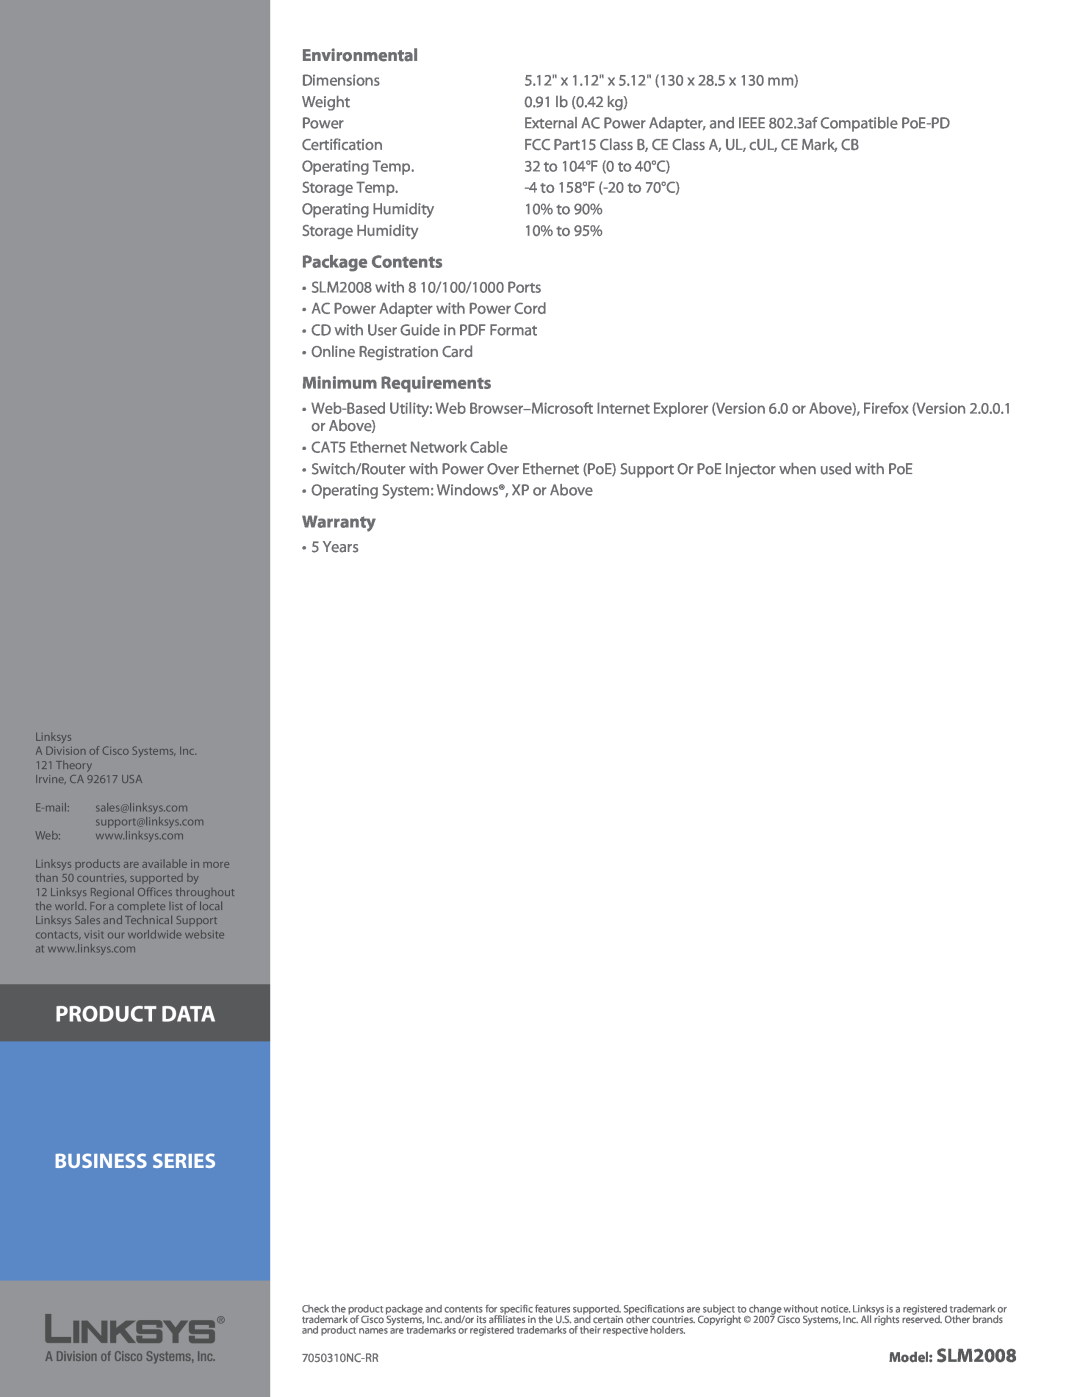 Linksys SLM2008 manual Product Data, Business Series, Environmental, Package Contents, Minimum Requirements, Warranty 